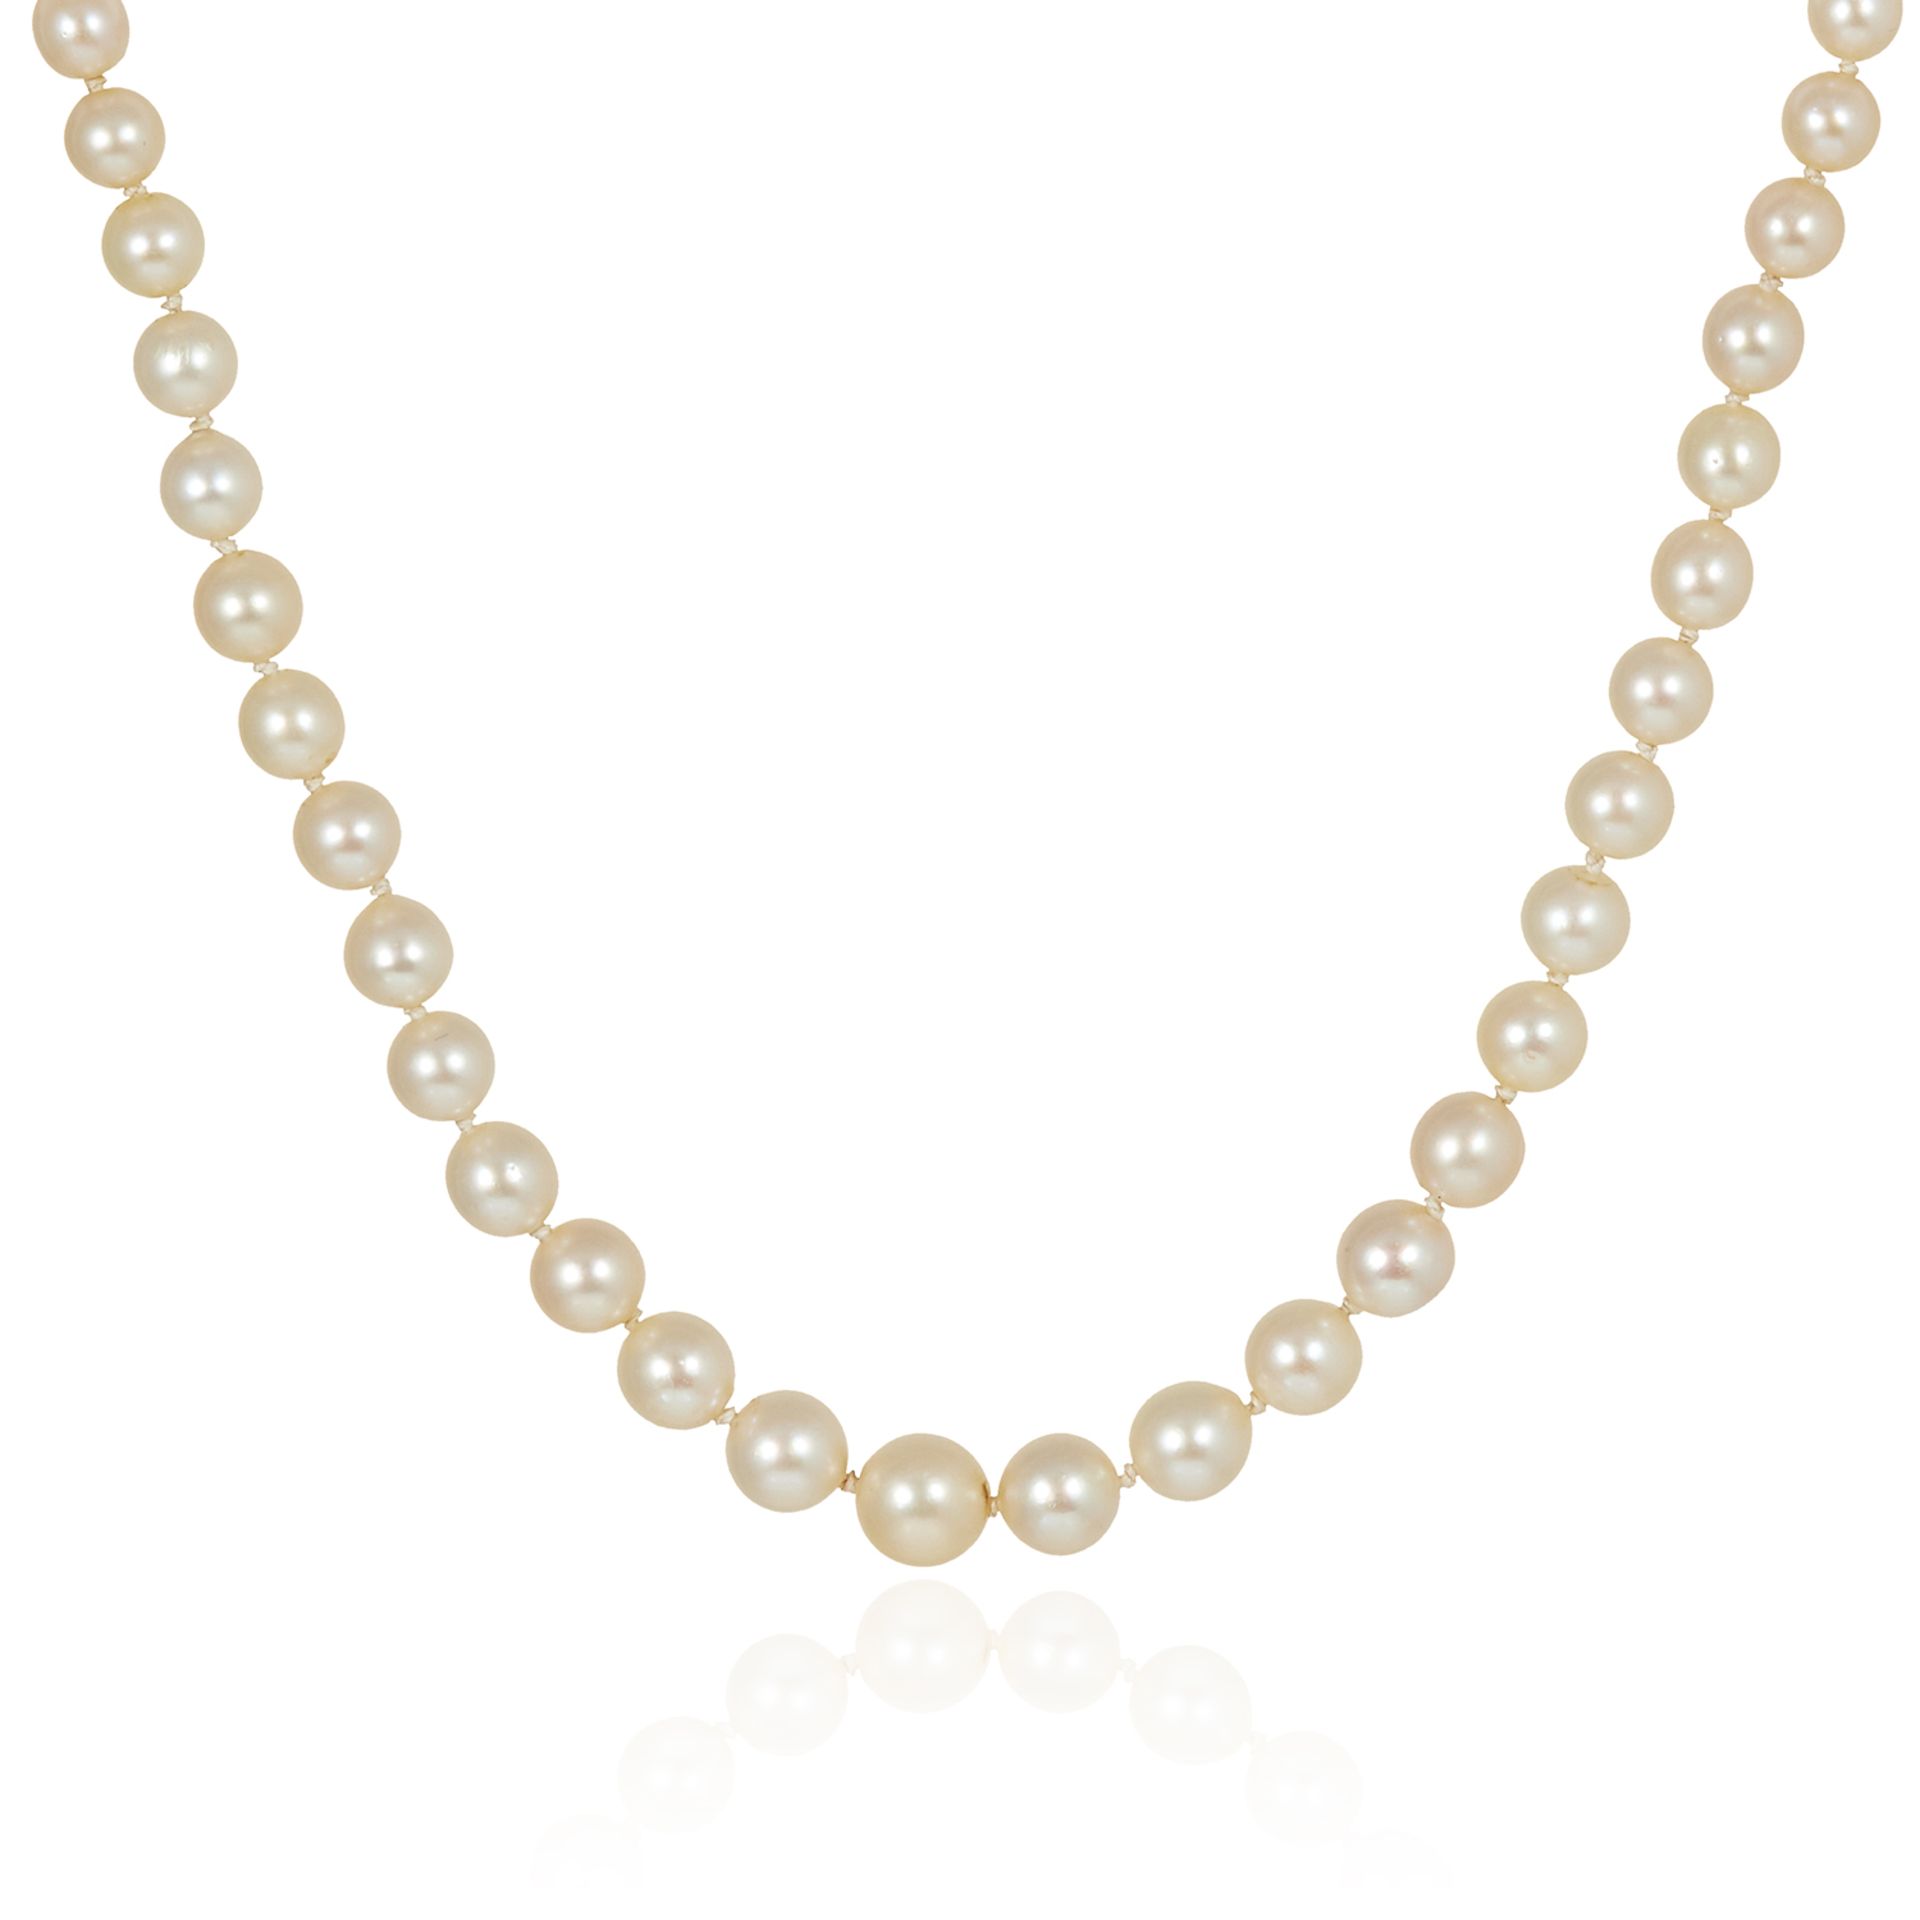 A SINGLE STRAND PEARL NECKLACE comprising of seventy-two pearls, between 3.4mm and 7.7mm in